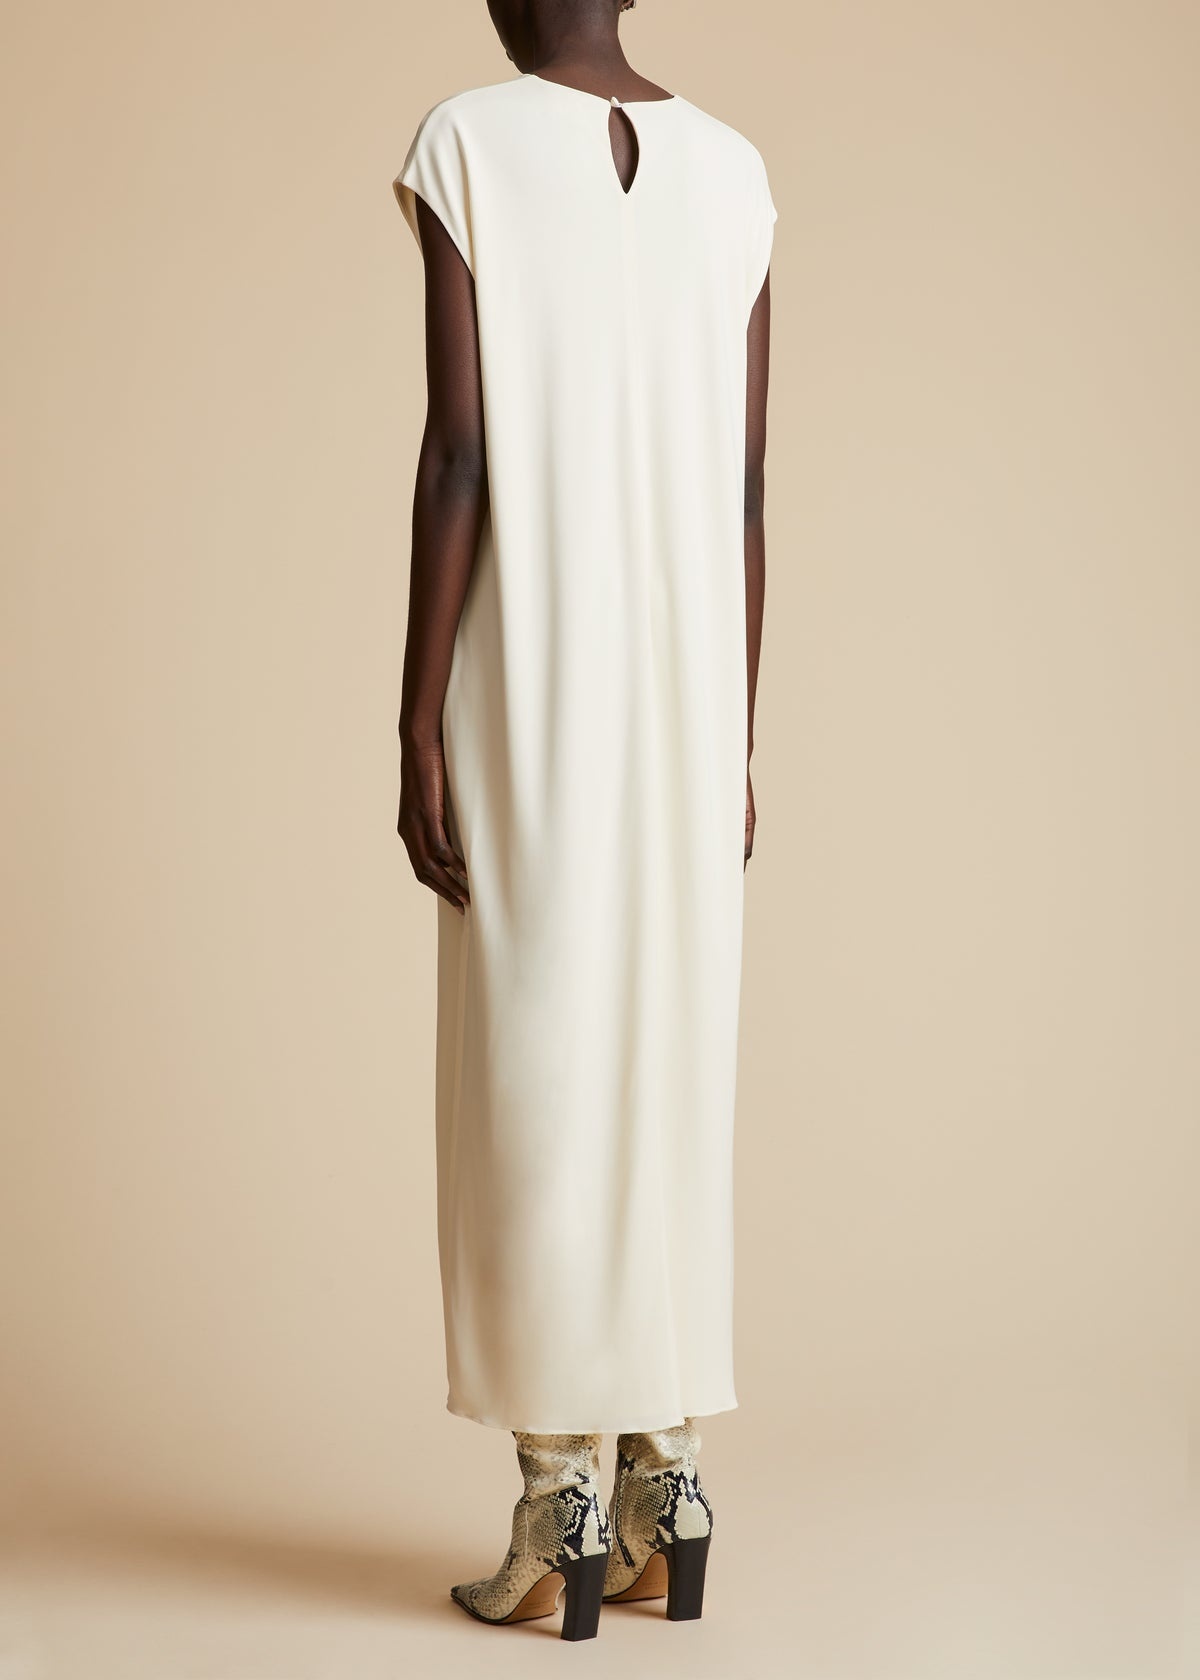 The Taylor Dress in Cream - 3